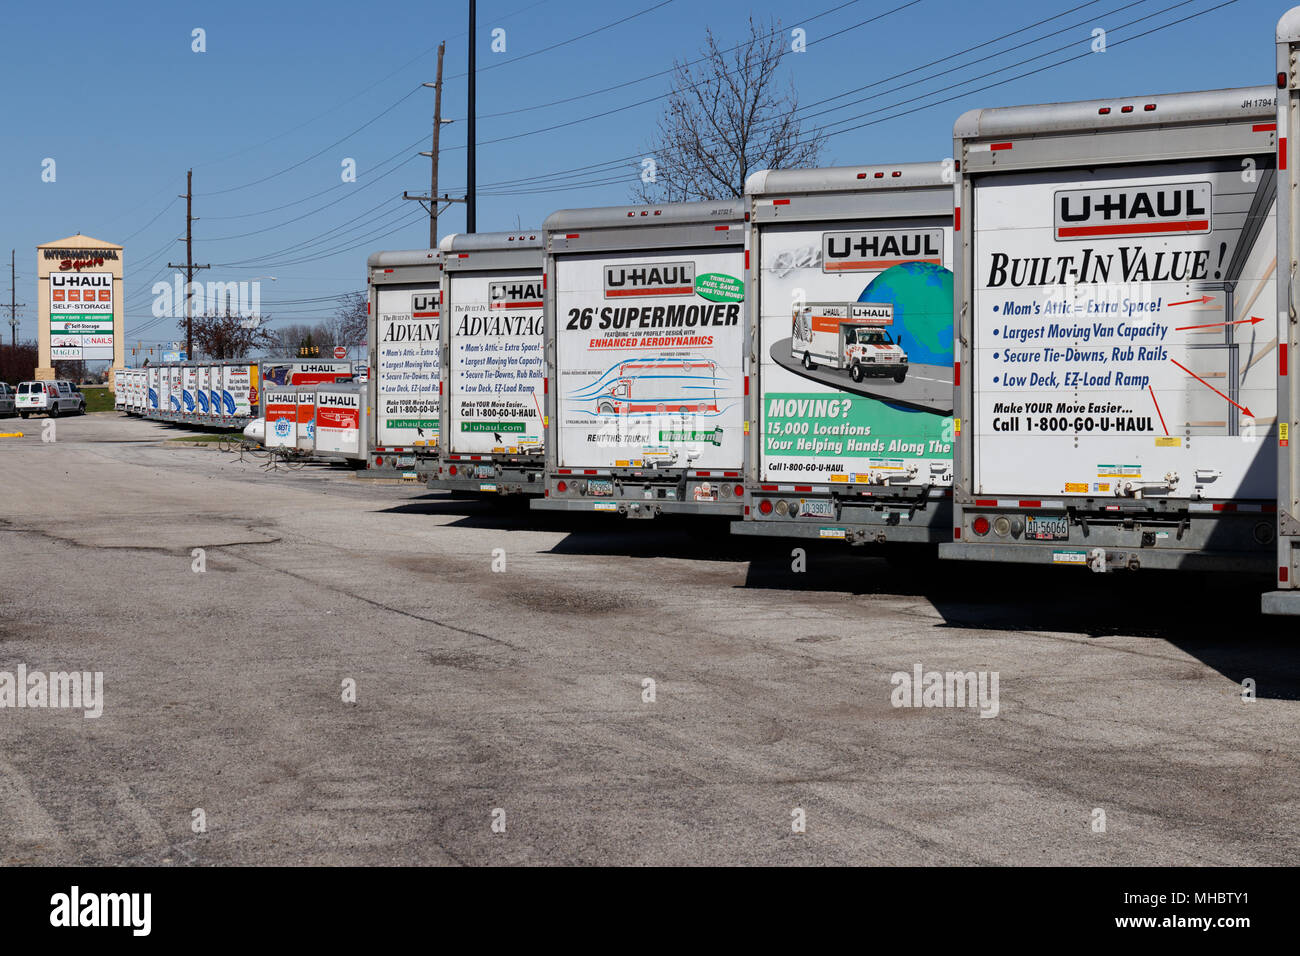 Lafayette - Circa April 2018: U-Haul Moving Truck Rental Location. U-Haul offers moving and storage solutions IV Stock Photo